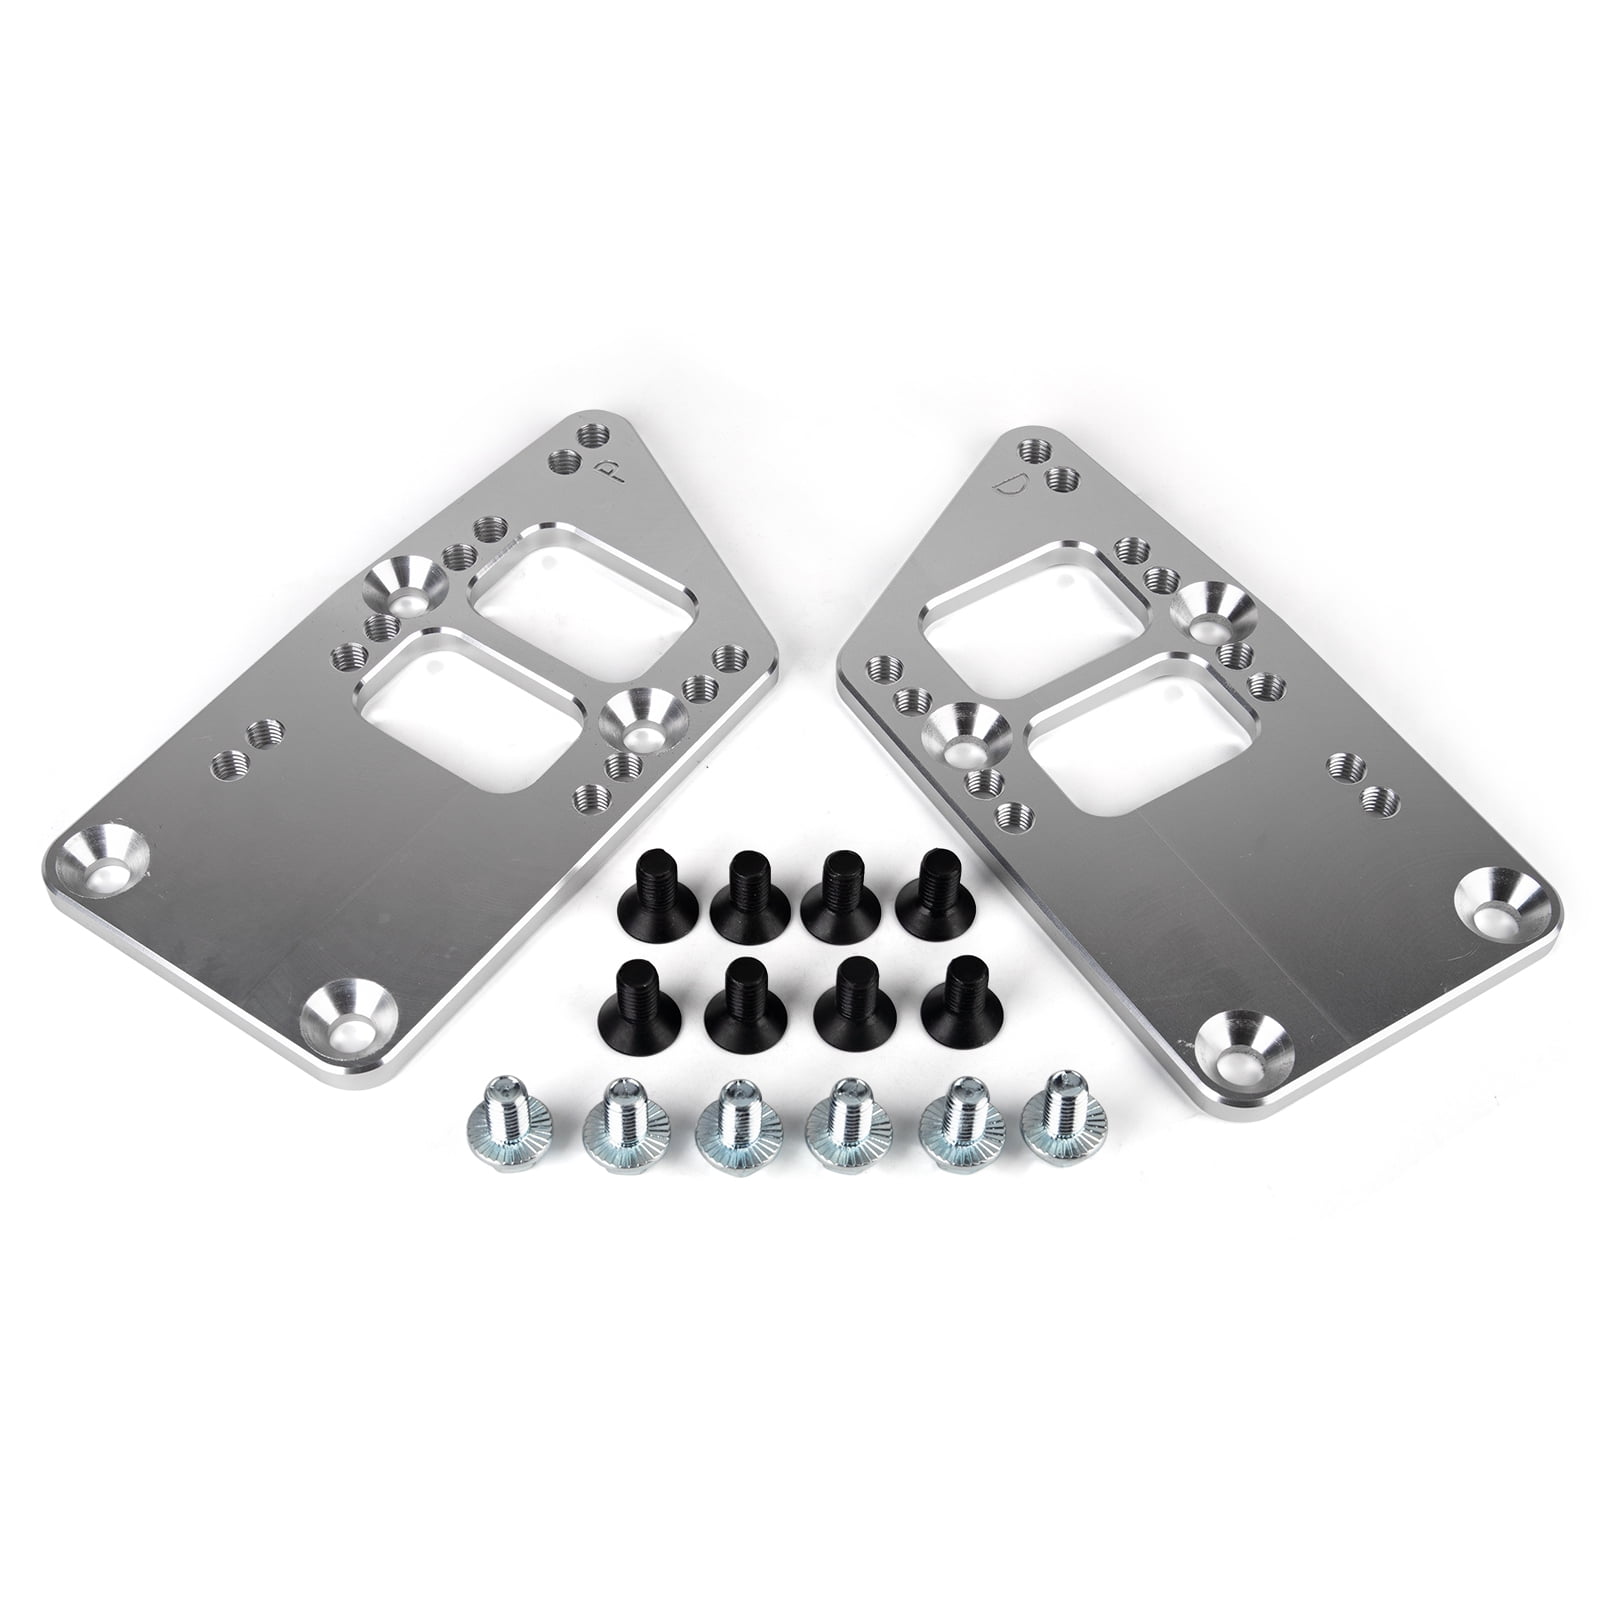 3mirrors Swap Motor Mounts Adjustable 4 Positions Billet Aluminum Compatible with LS Swap LS Conversion 551628 for SBC Vehicle to LS Engine Full Kit